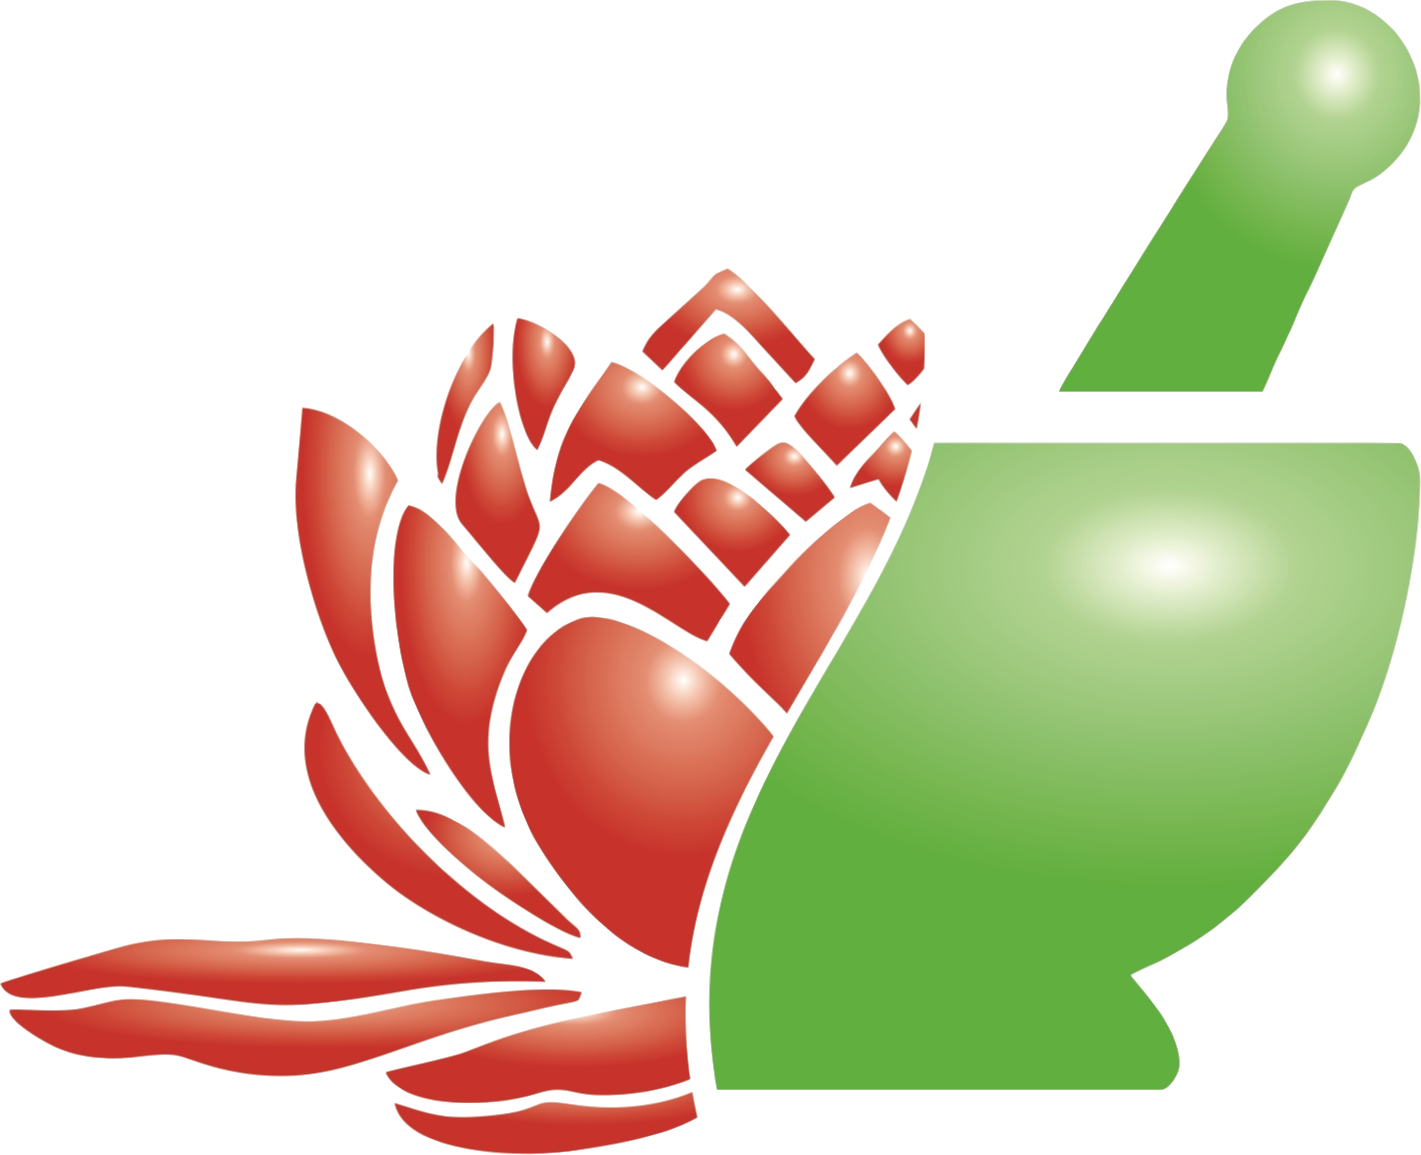 logo image that consists of a protea flower and a stone grind bowl for a chemist